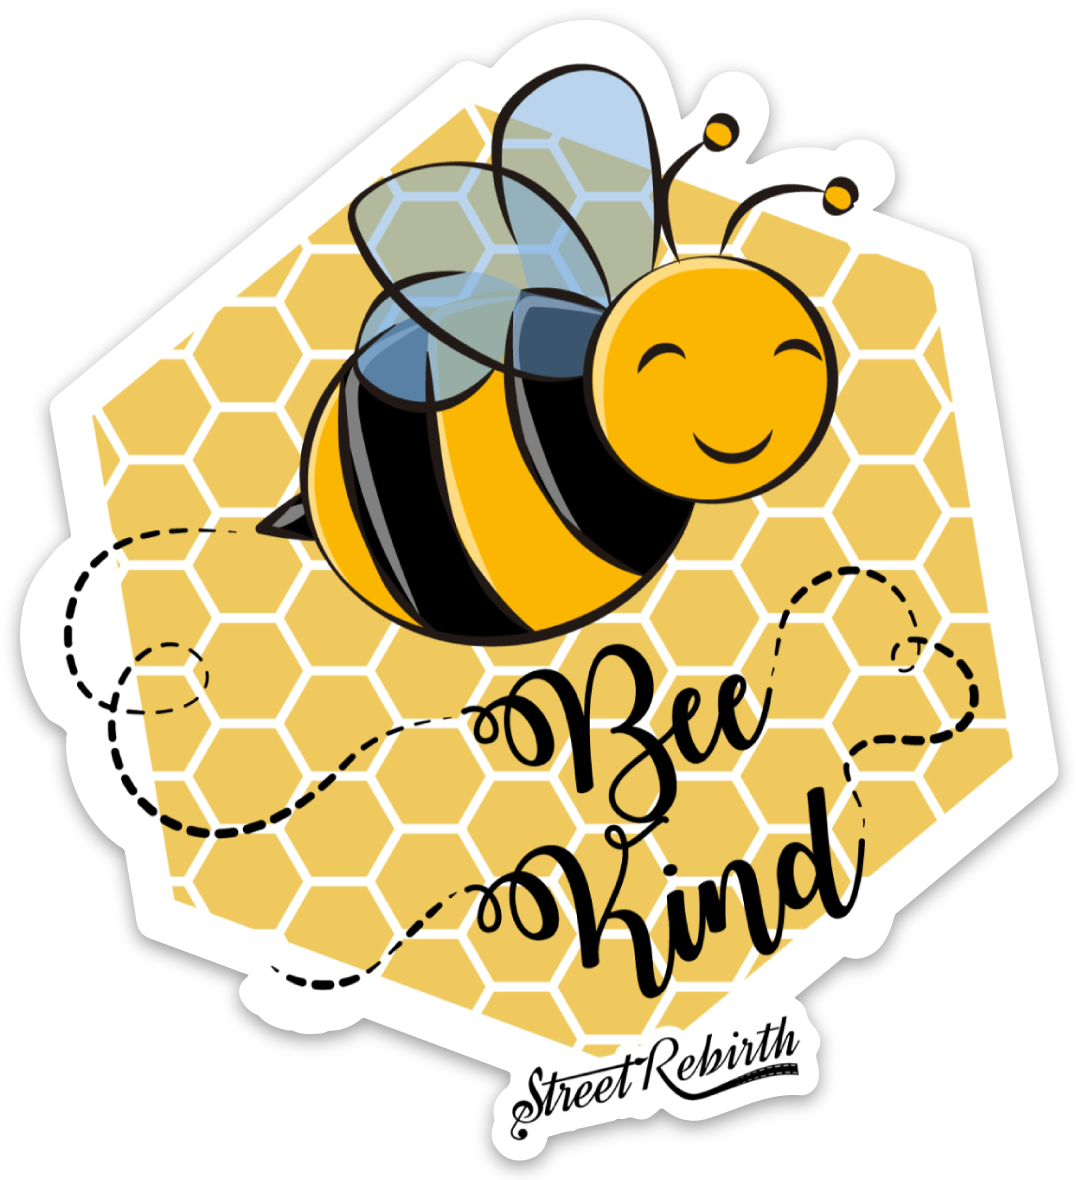 Bee Kind PUN STICKER – ONE 4 INCH WATER PROOF VINYL STICKER – FOR HYDRO FLASK, SKATEBOARD, LAPTOP, PLANNER, CAR, COLLECTING, GIFTING